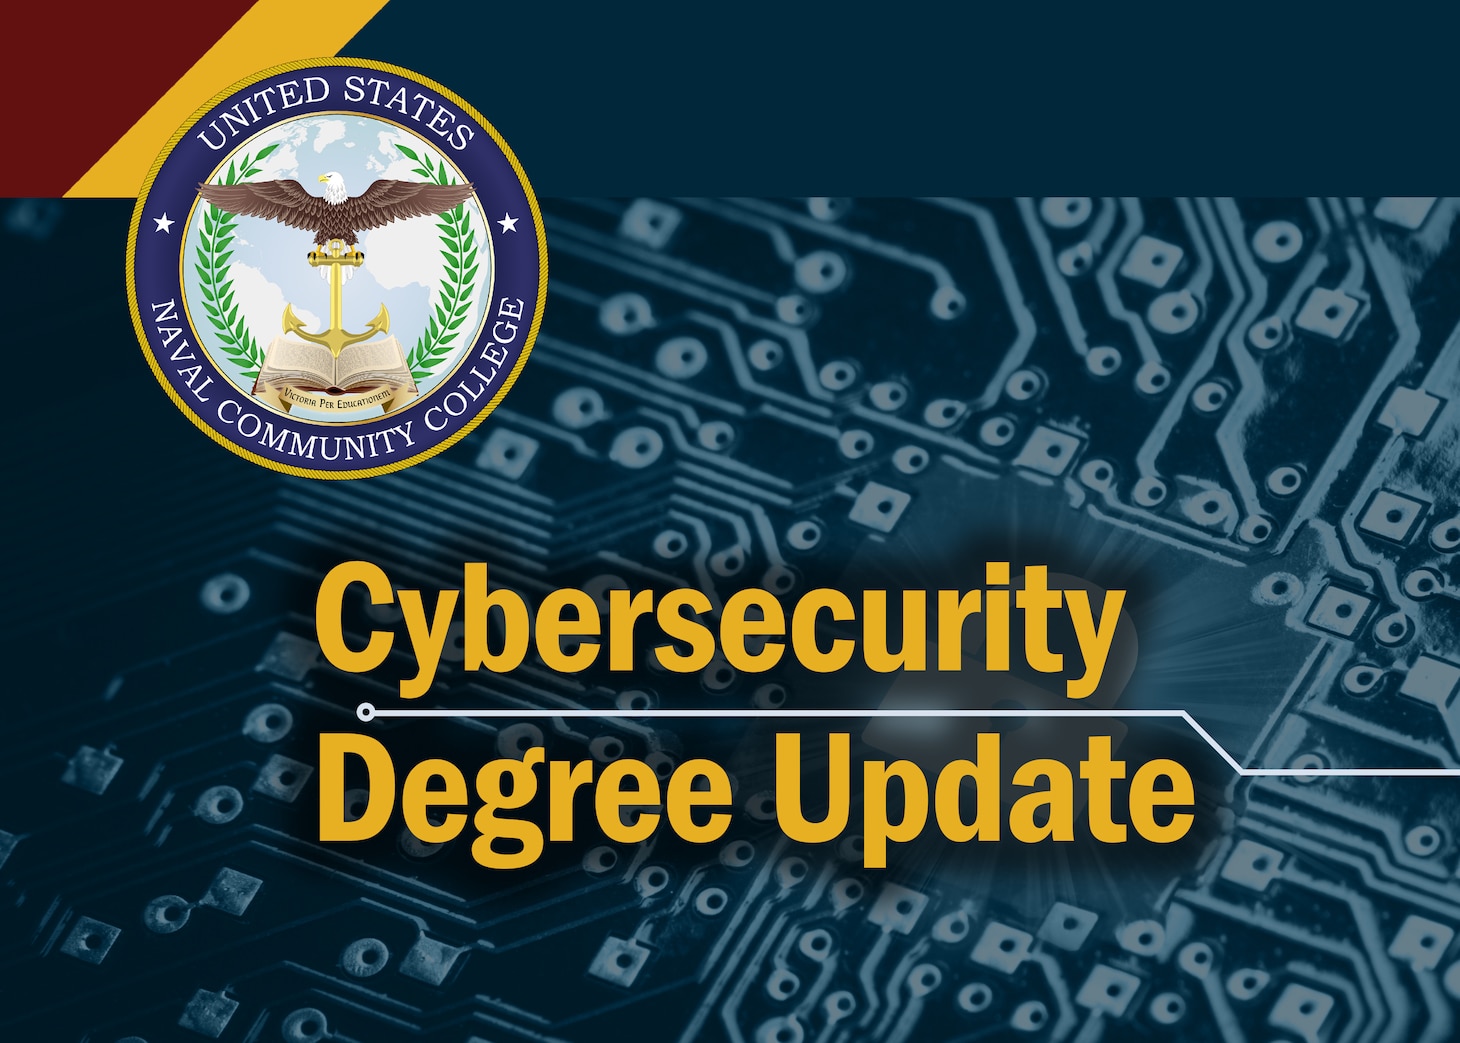 Cybersecurity degree update graphic for use by the United States Naval Community College. This graphic was creating using a composite of digital images, lines, shapes, and text. (U.S. Navy graphic illustration by Chief Mass Communication Specialist Xander Gamble)